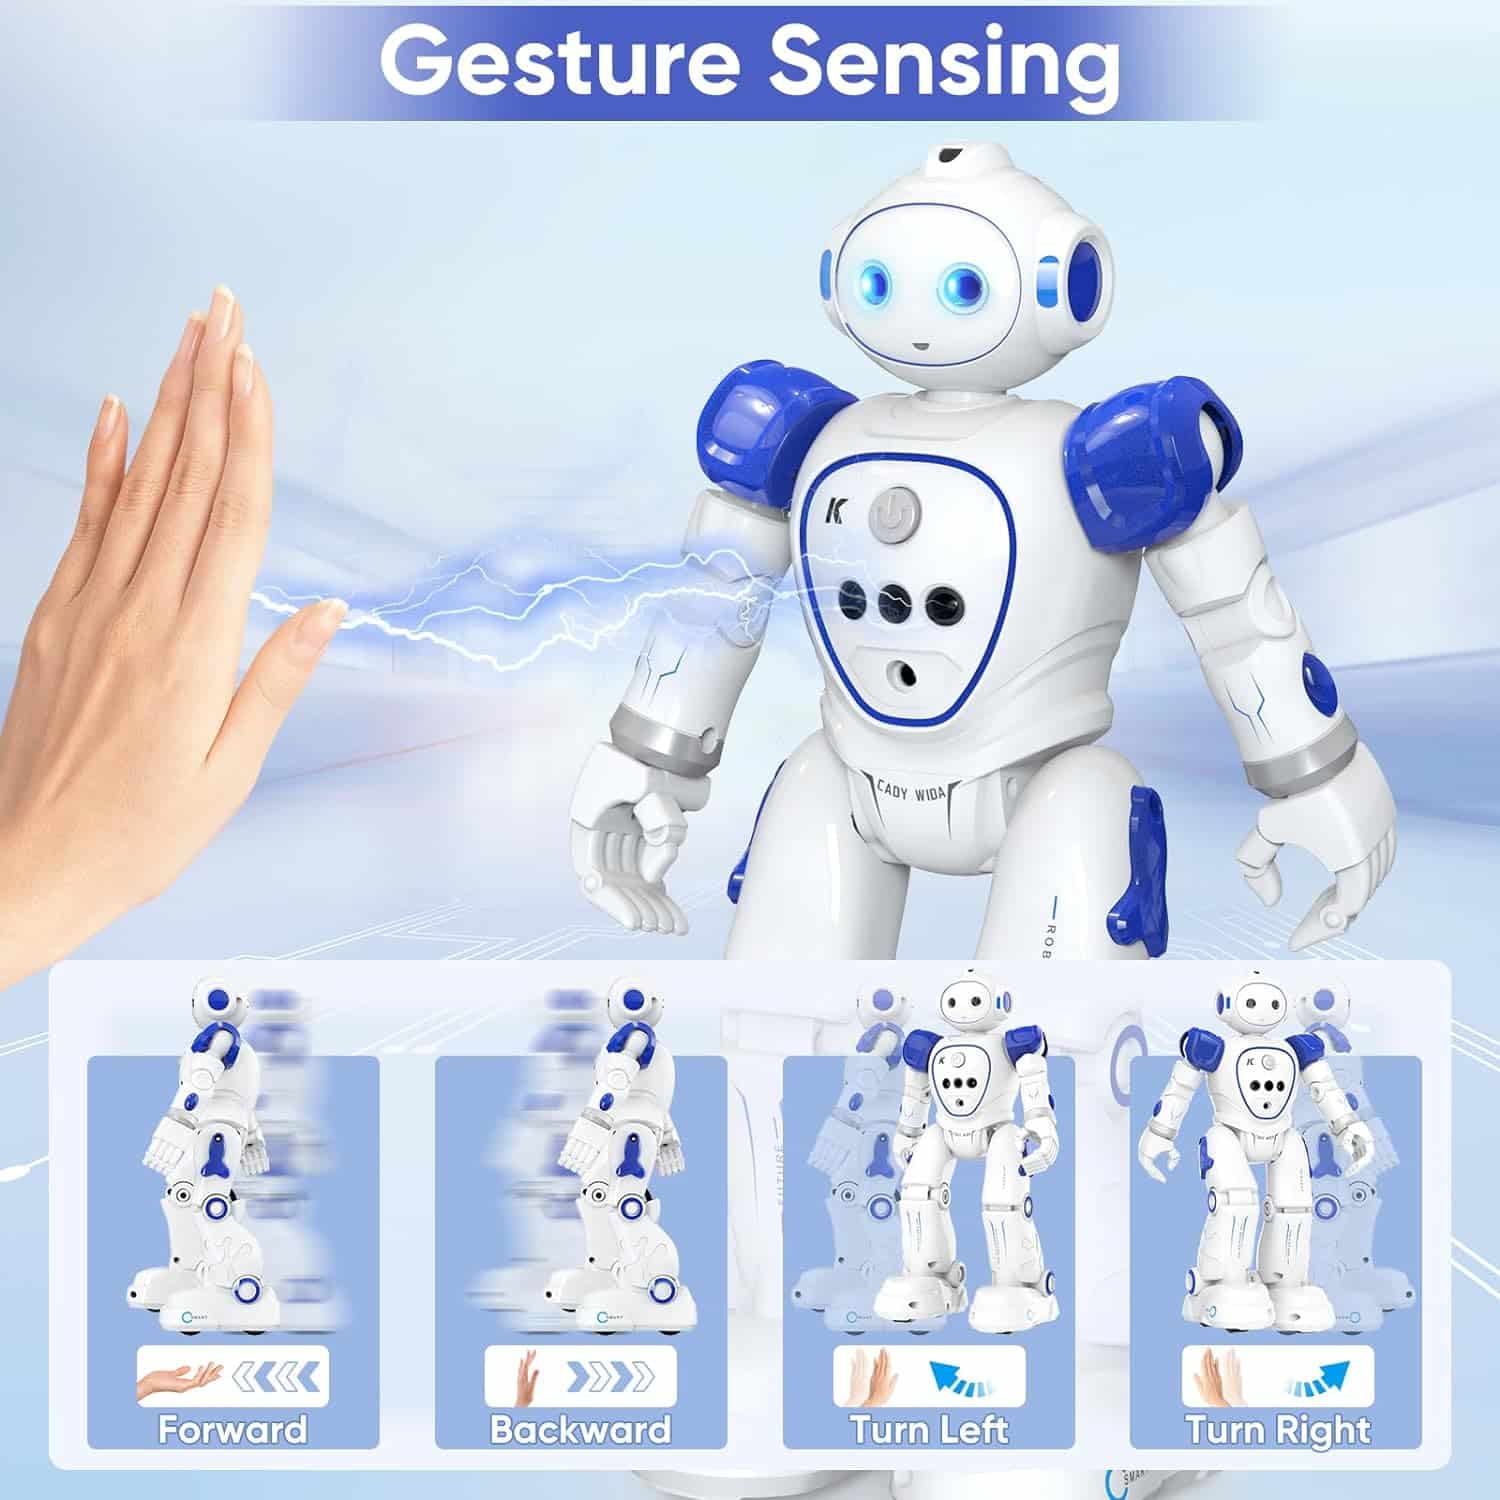 The TSJLIKI RC Robot Toys for Kids: A Comprehensive Review of the Gesture-Sensing, Smart Programmable Robot Toy